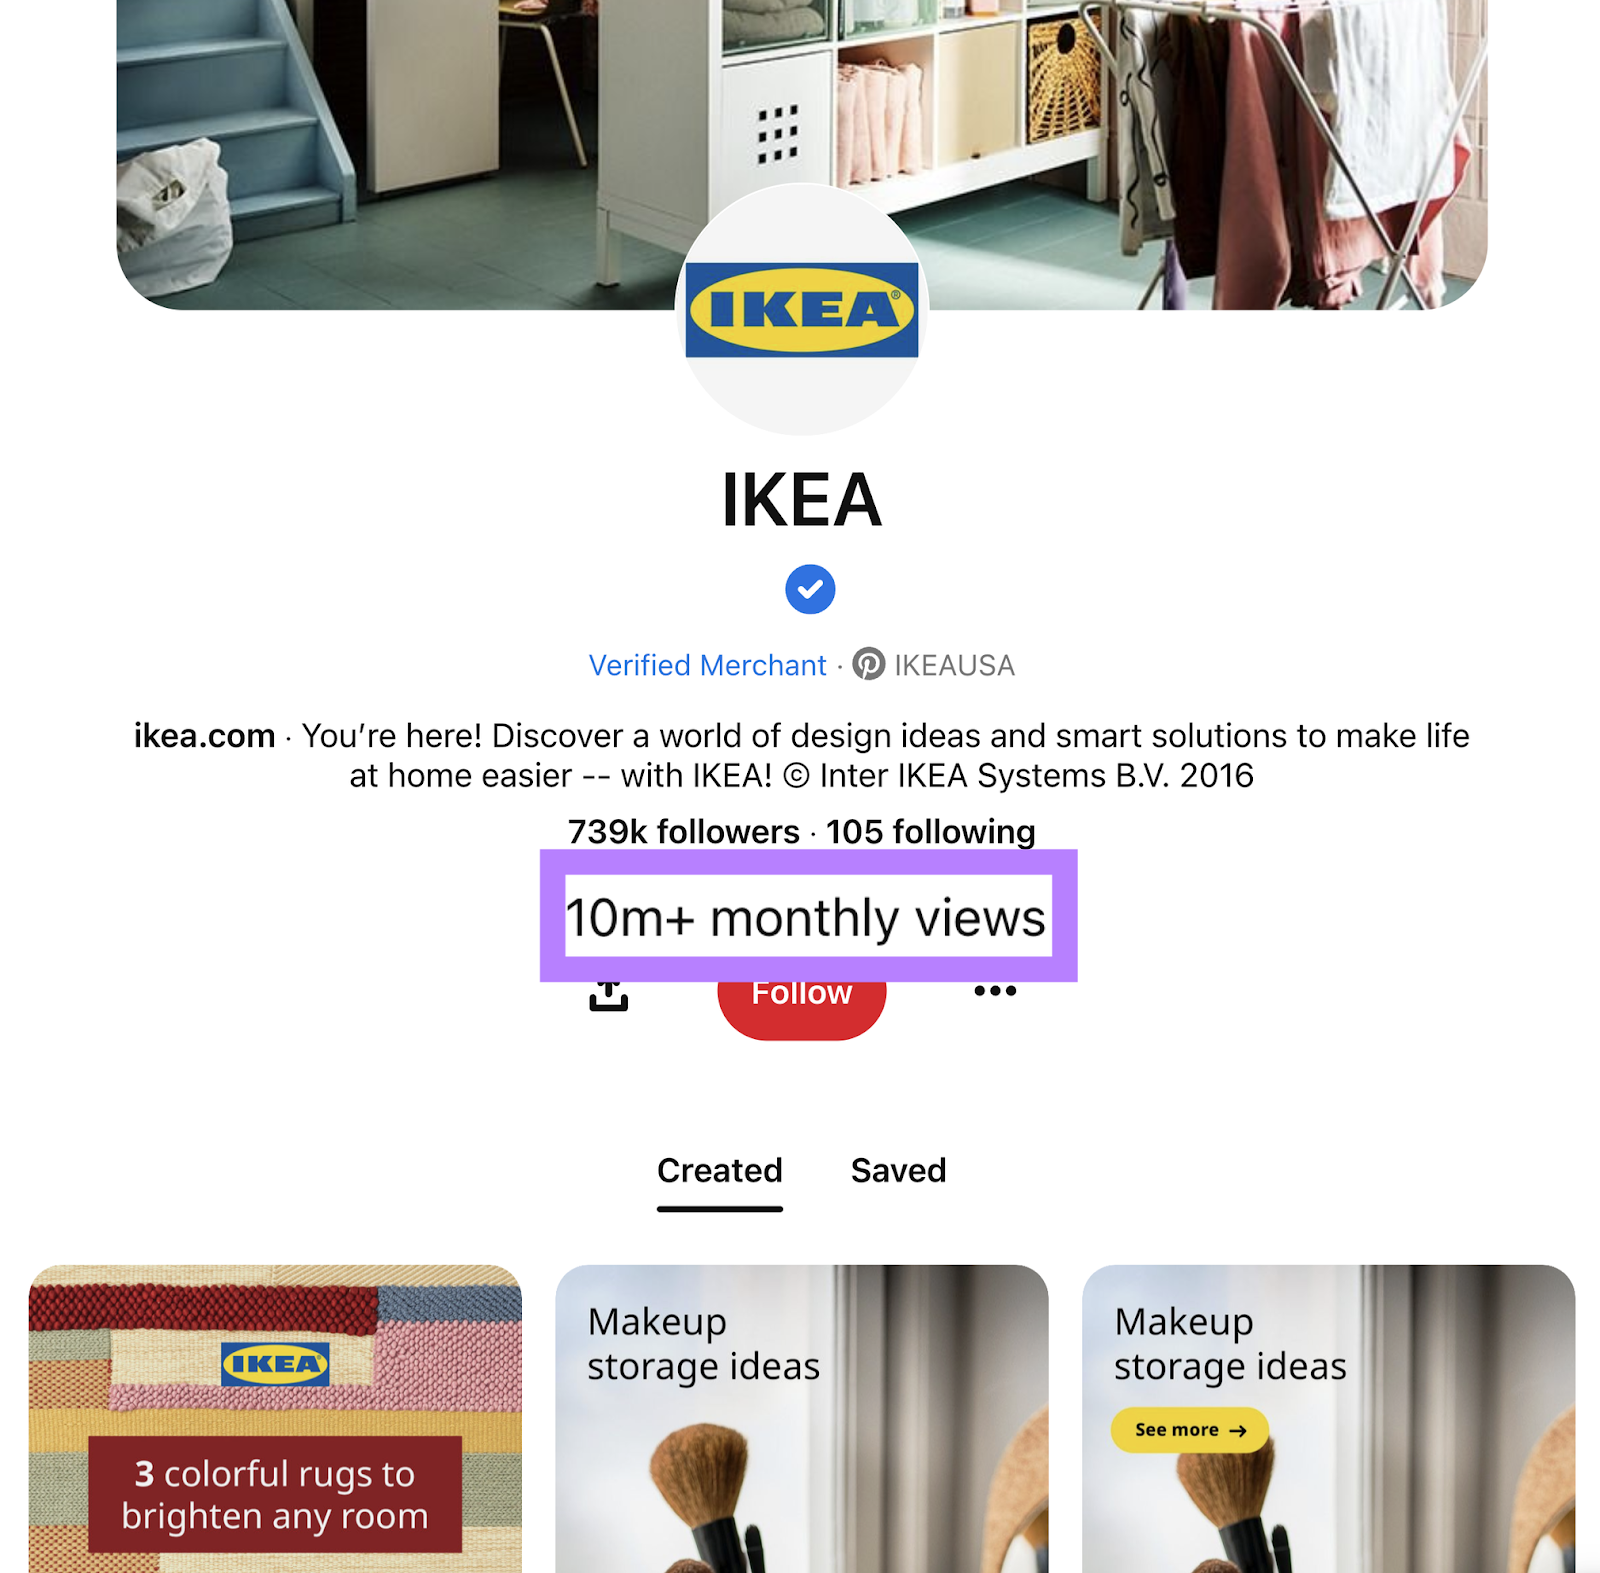 IKEA Pinterest profile with over 10m monthly views